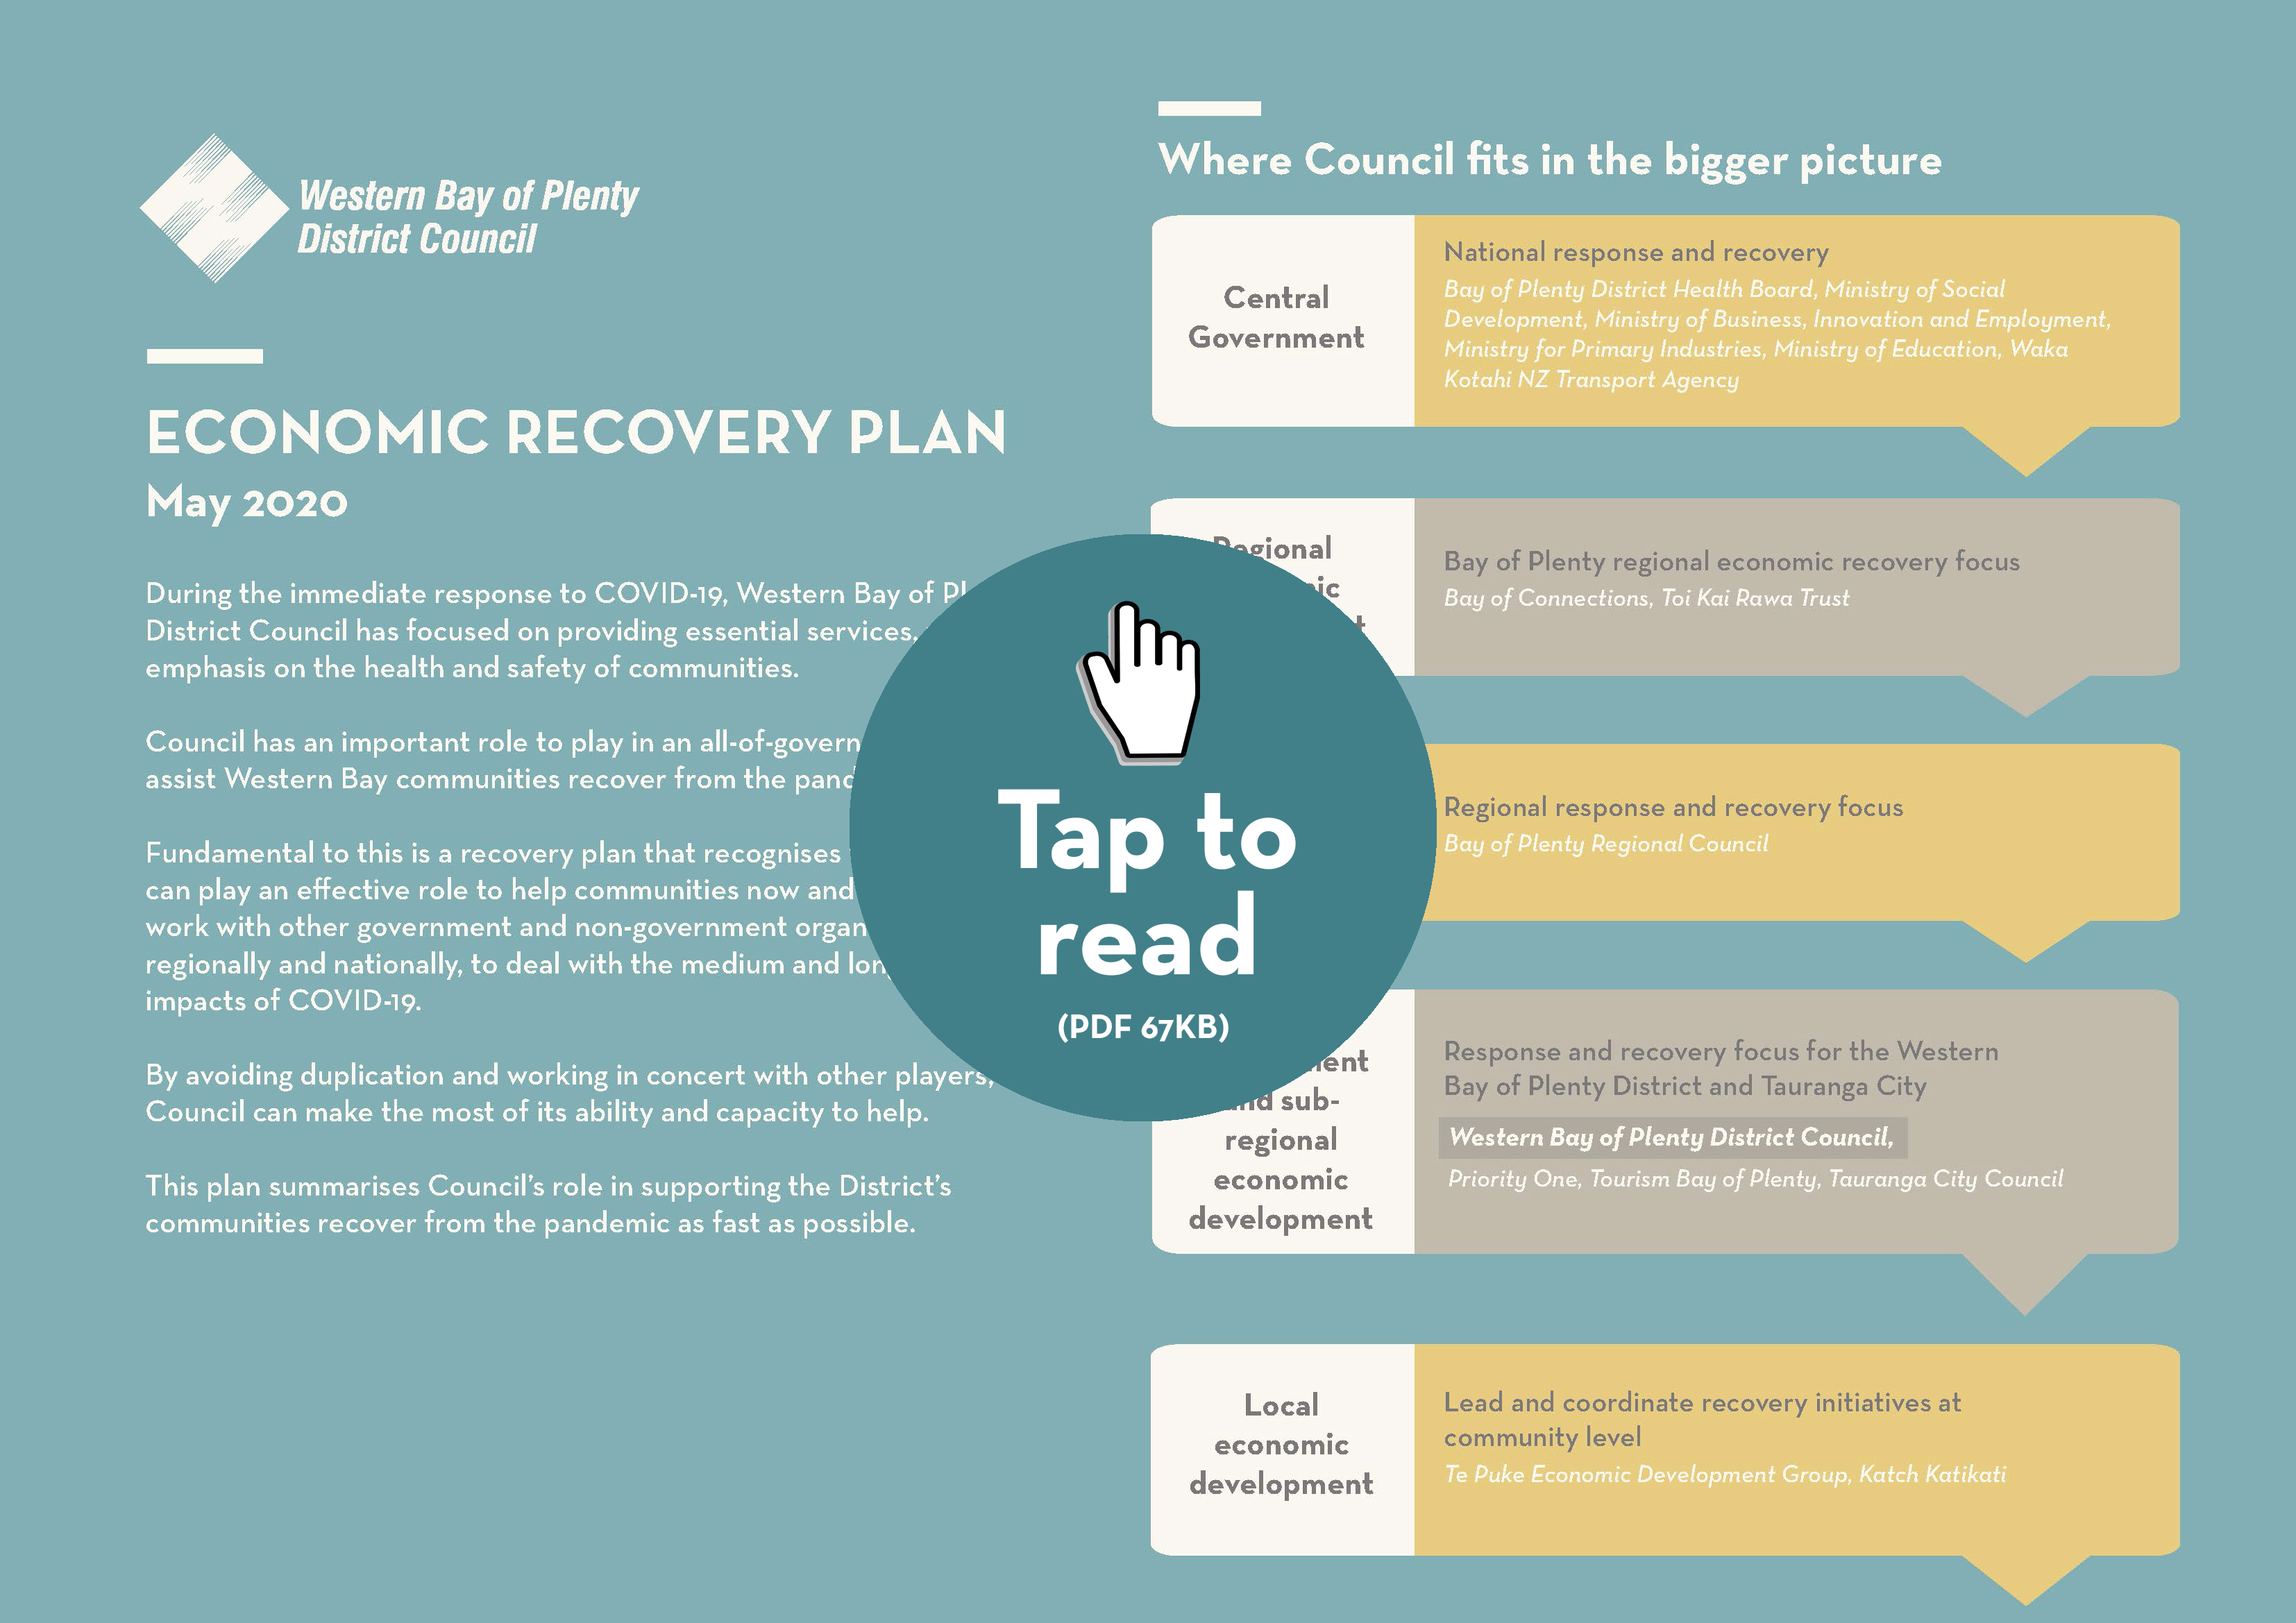 Economic recovery plan - tap to read